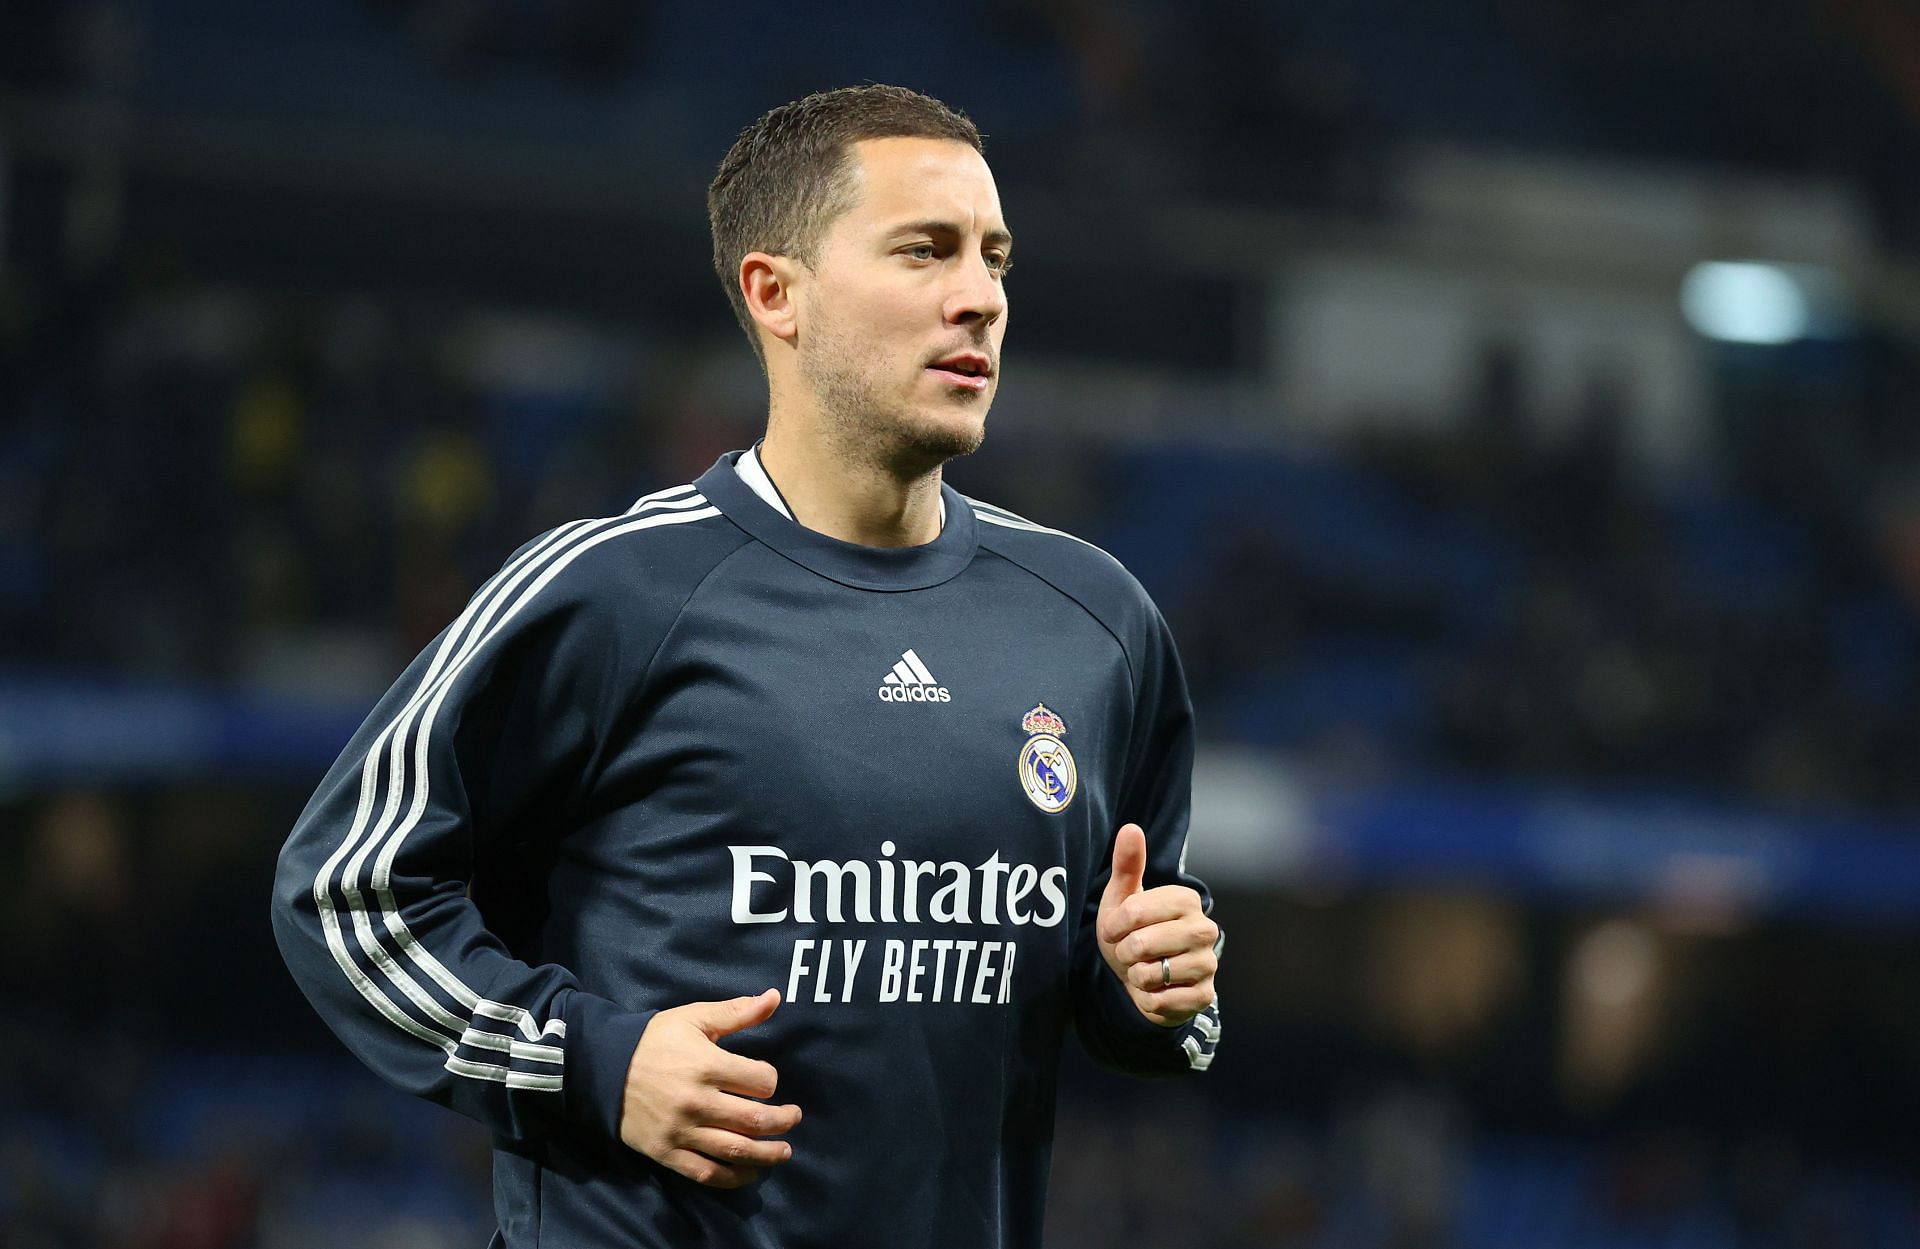 Eden Hazard could leave Real Madrid and join PSG this year.